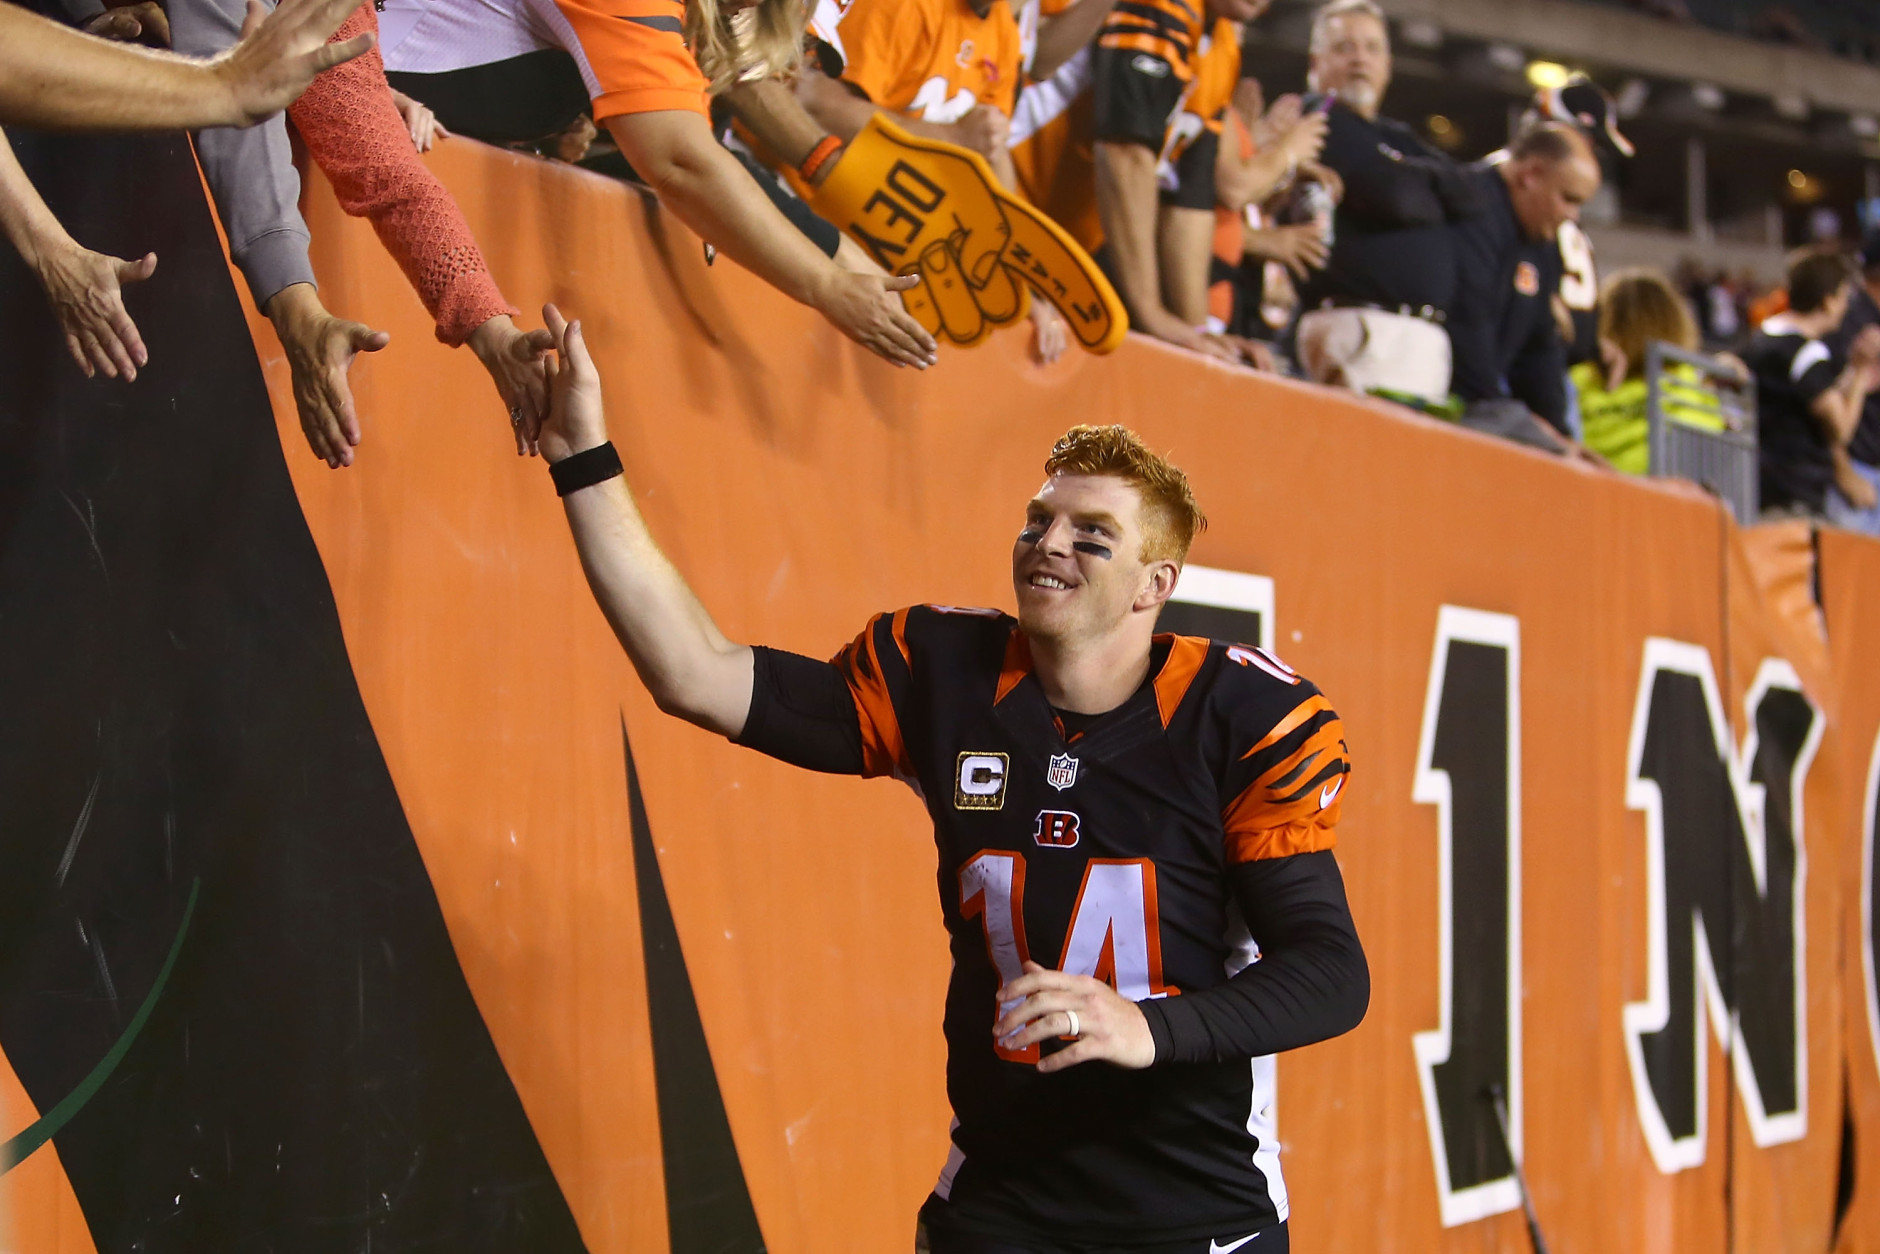 CINCINNATI, OH - NOVEMBER 5:  Andy Dalton #14 of the Cincinnati Bengals is congratulated by fans after defeating the Cleveland Browns 31-10 at Paul Brown Stadium on November 5, 2015 in Cincinnati, Ohio. (Photo by Andrew Weber/Getty Images)